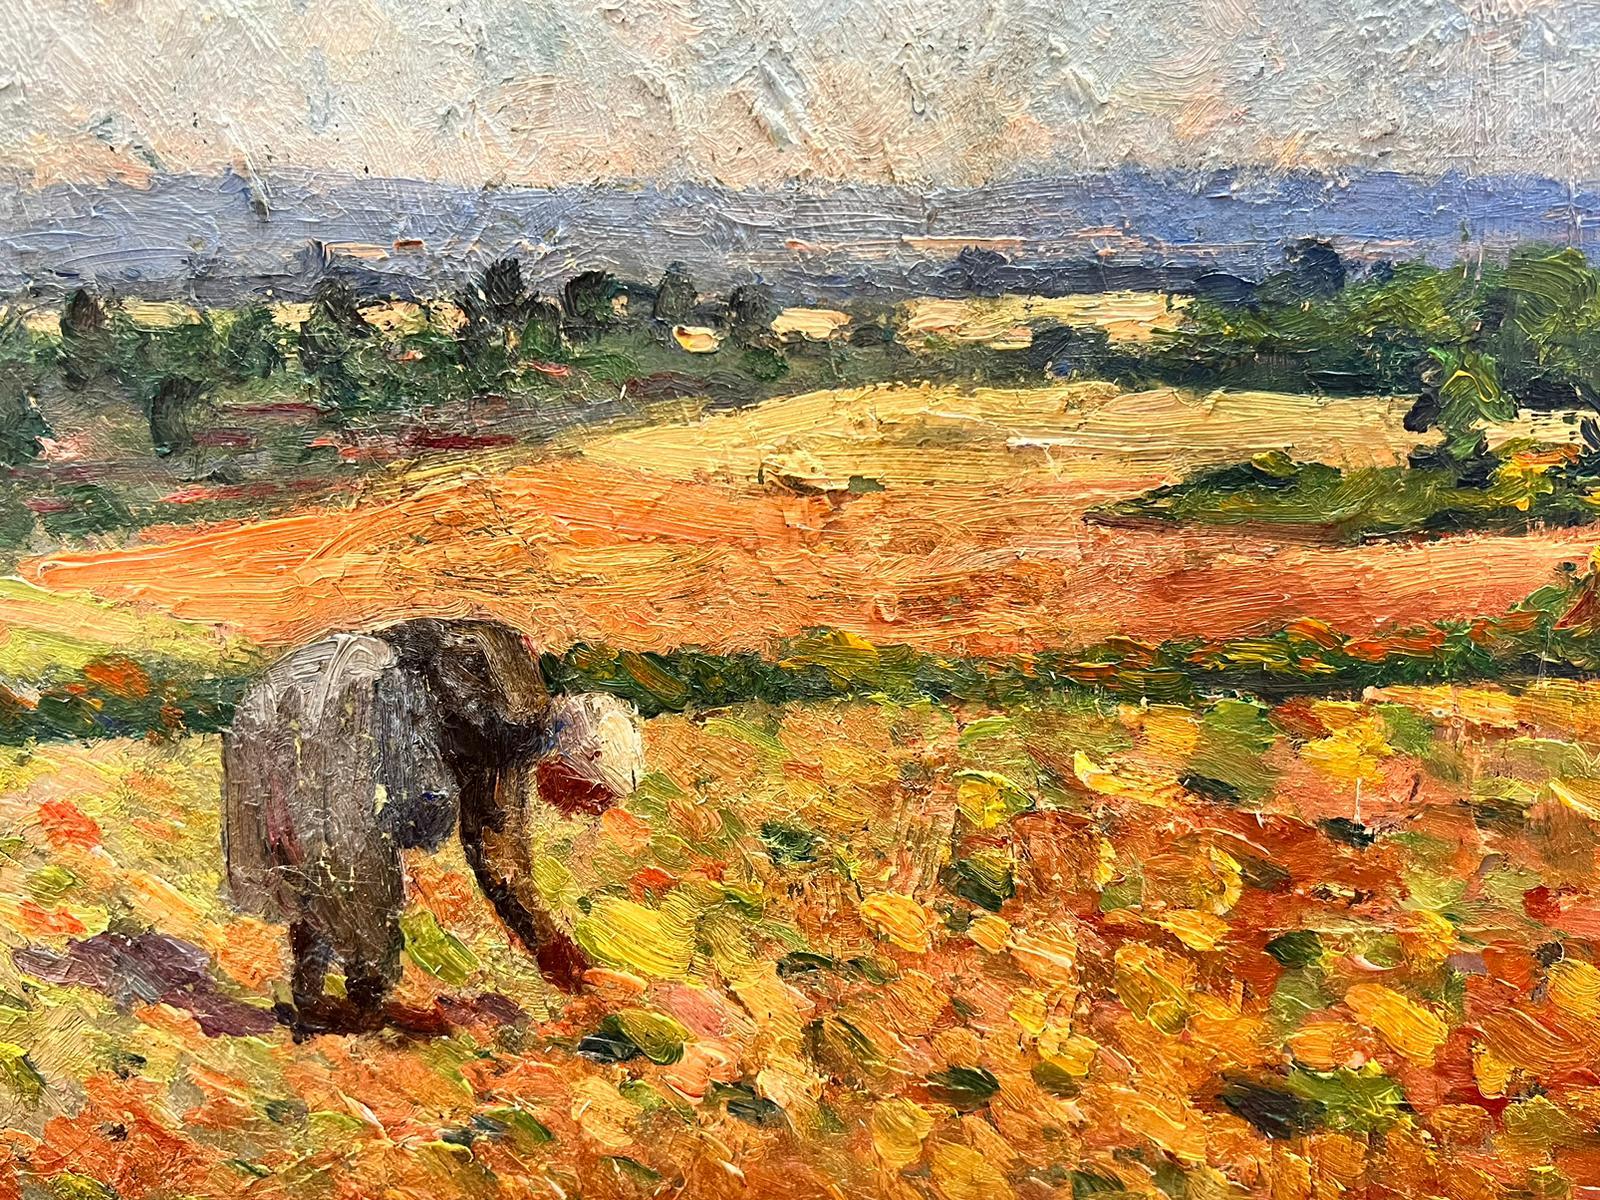 Artist/ School: Suzanne Crochet (French c. 1930) French Impressionist artist

Title: the Gleaner

Medium: oil on board, unframed

board: 9.5 x 13 inches

Provenance: private collection, France

Condition: The painting is in overall good and sound